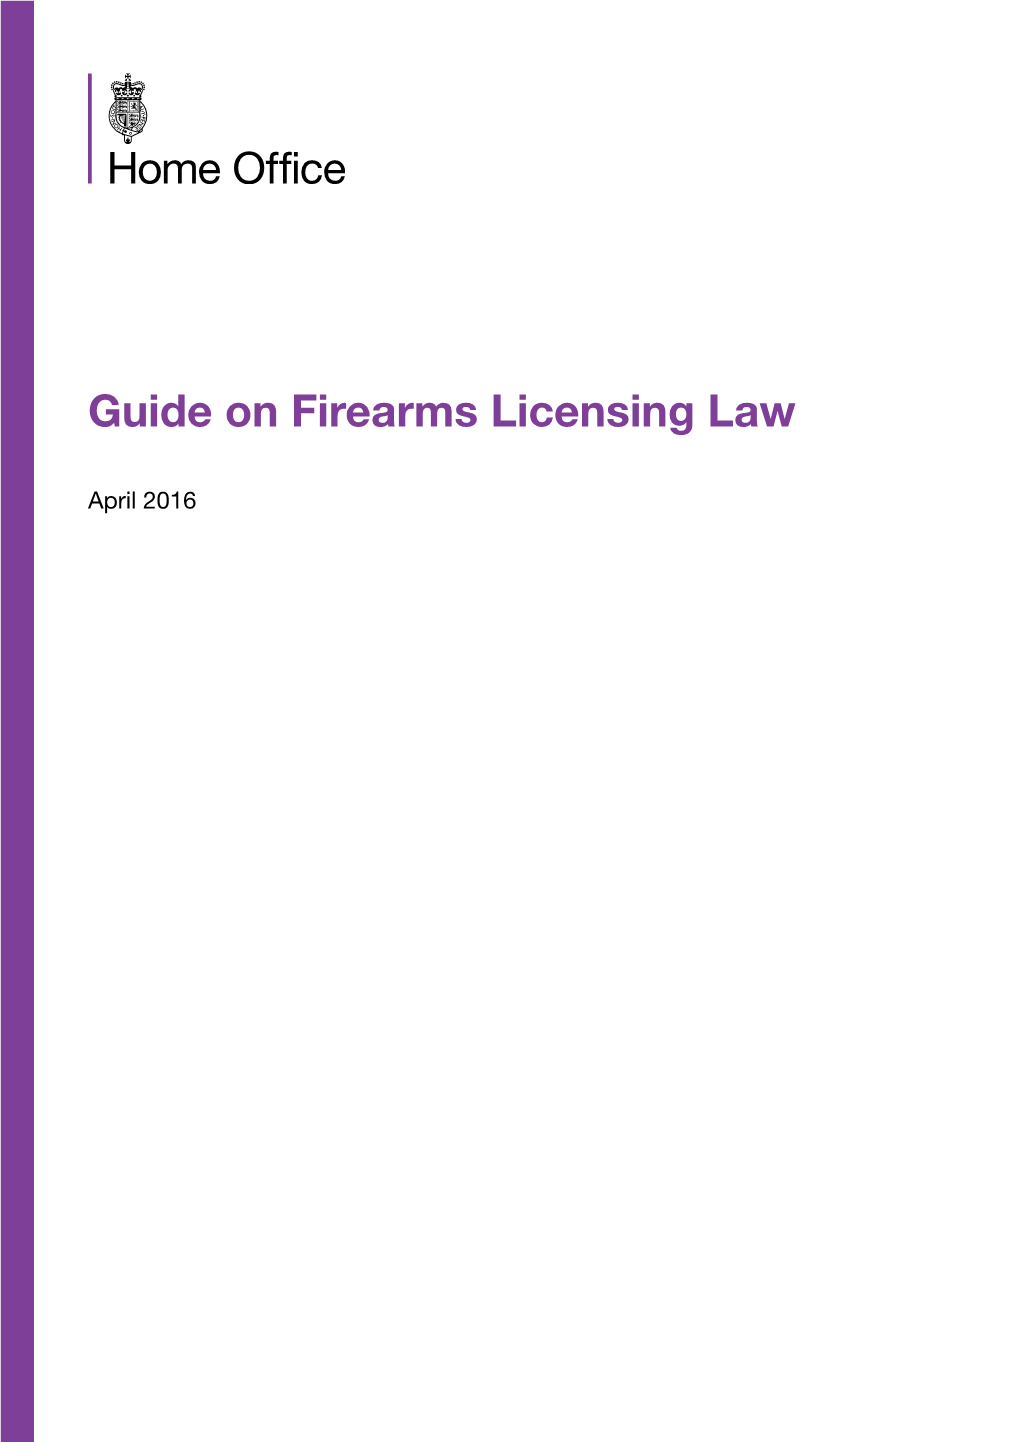 Guidance on Firearms Licensing